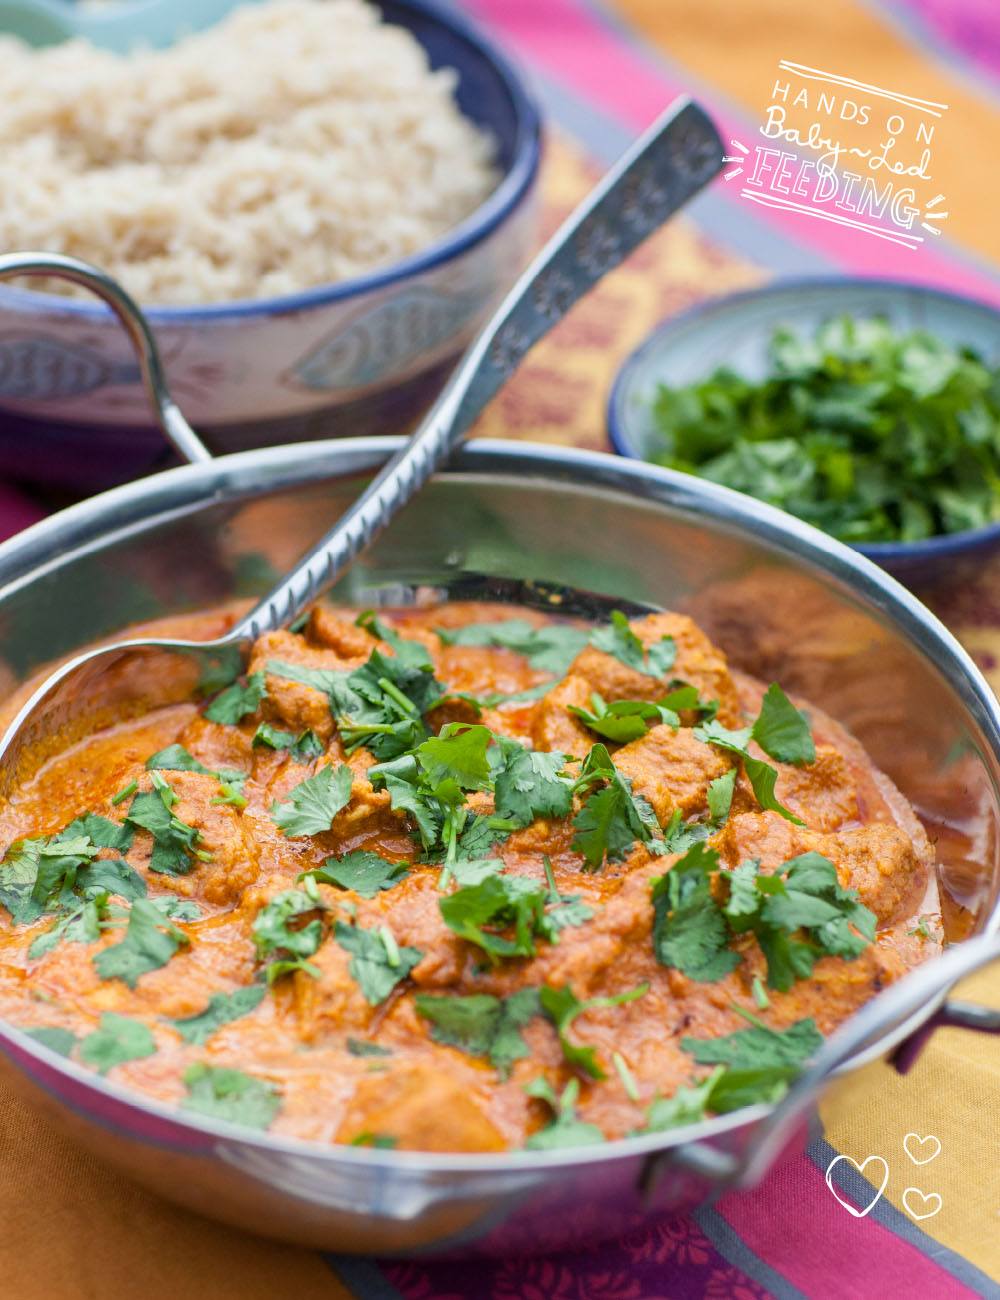 Baby Led Feeding Healthy Chicken Tikka Masala Currys for Babies. Homemade Baby led weaning Recipes Aileen Cox Blundell. 